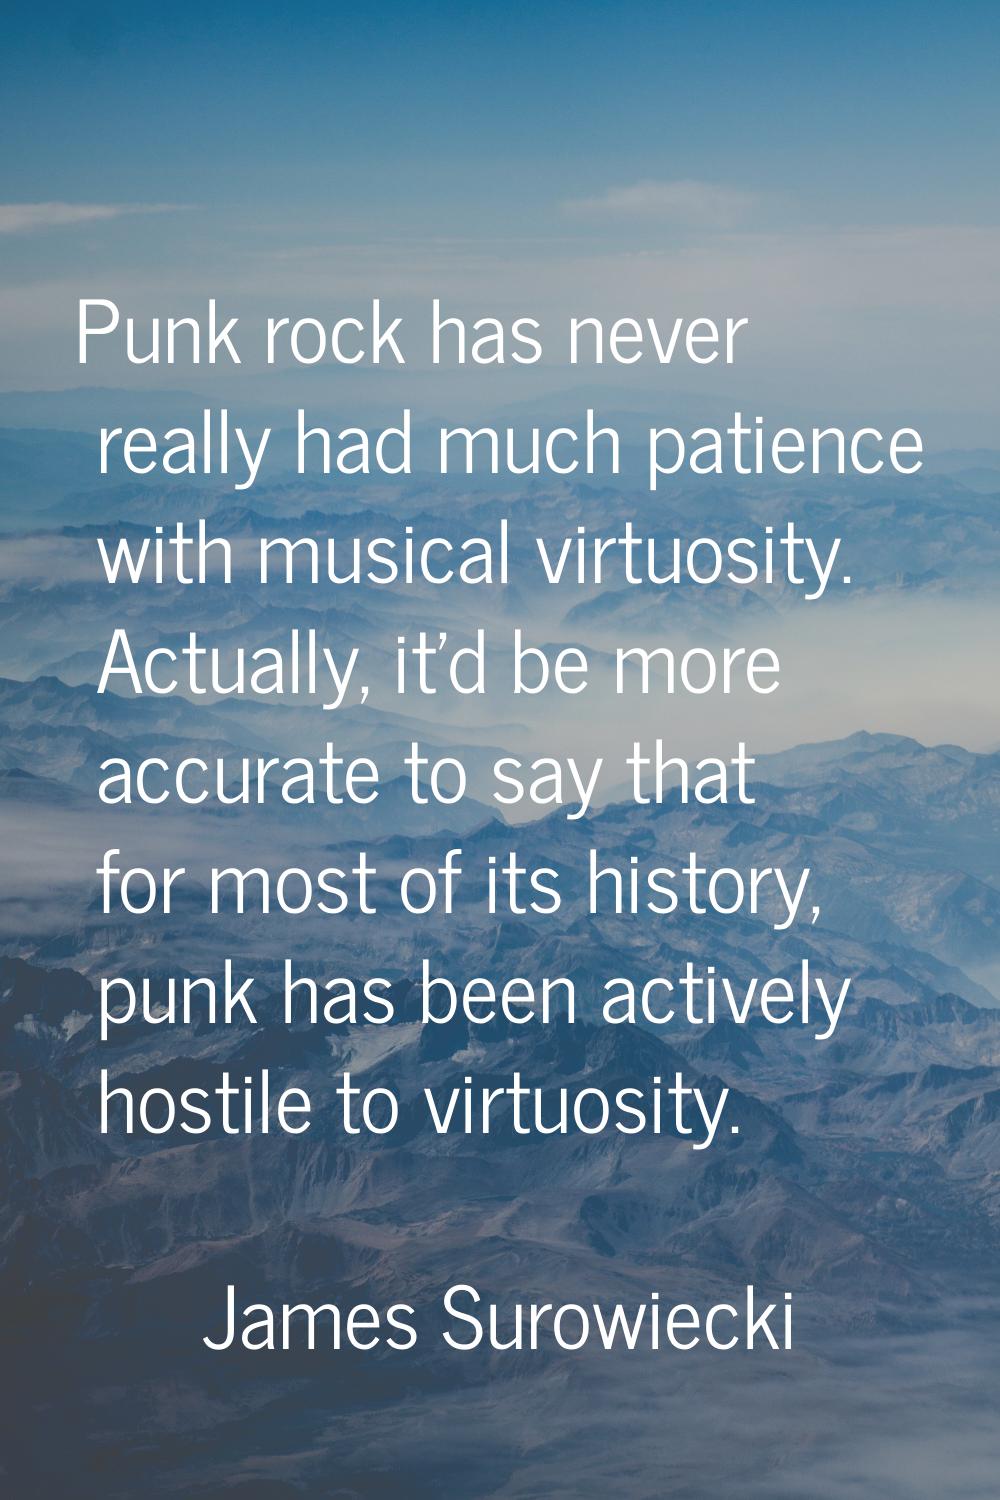 Punk rock has never really had much patience with musical virtuosity. Actually, it'd be more accura